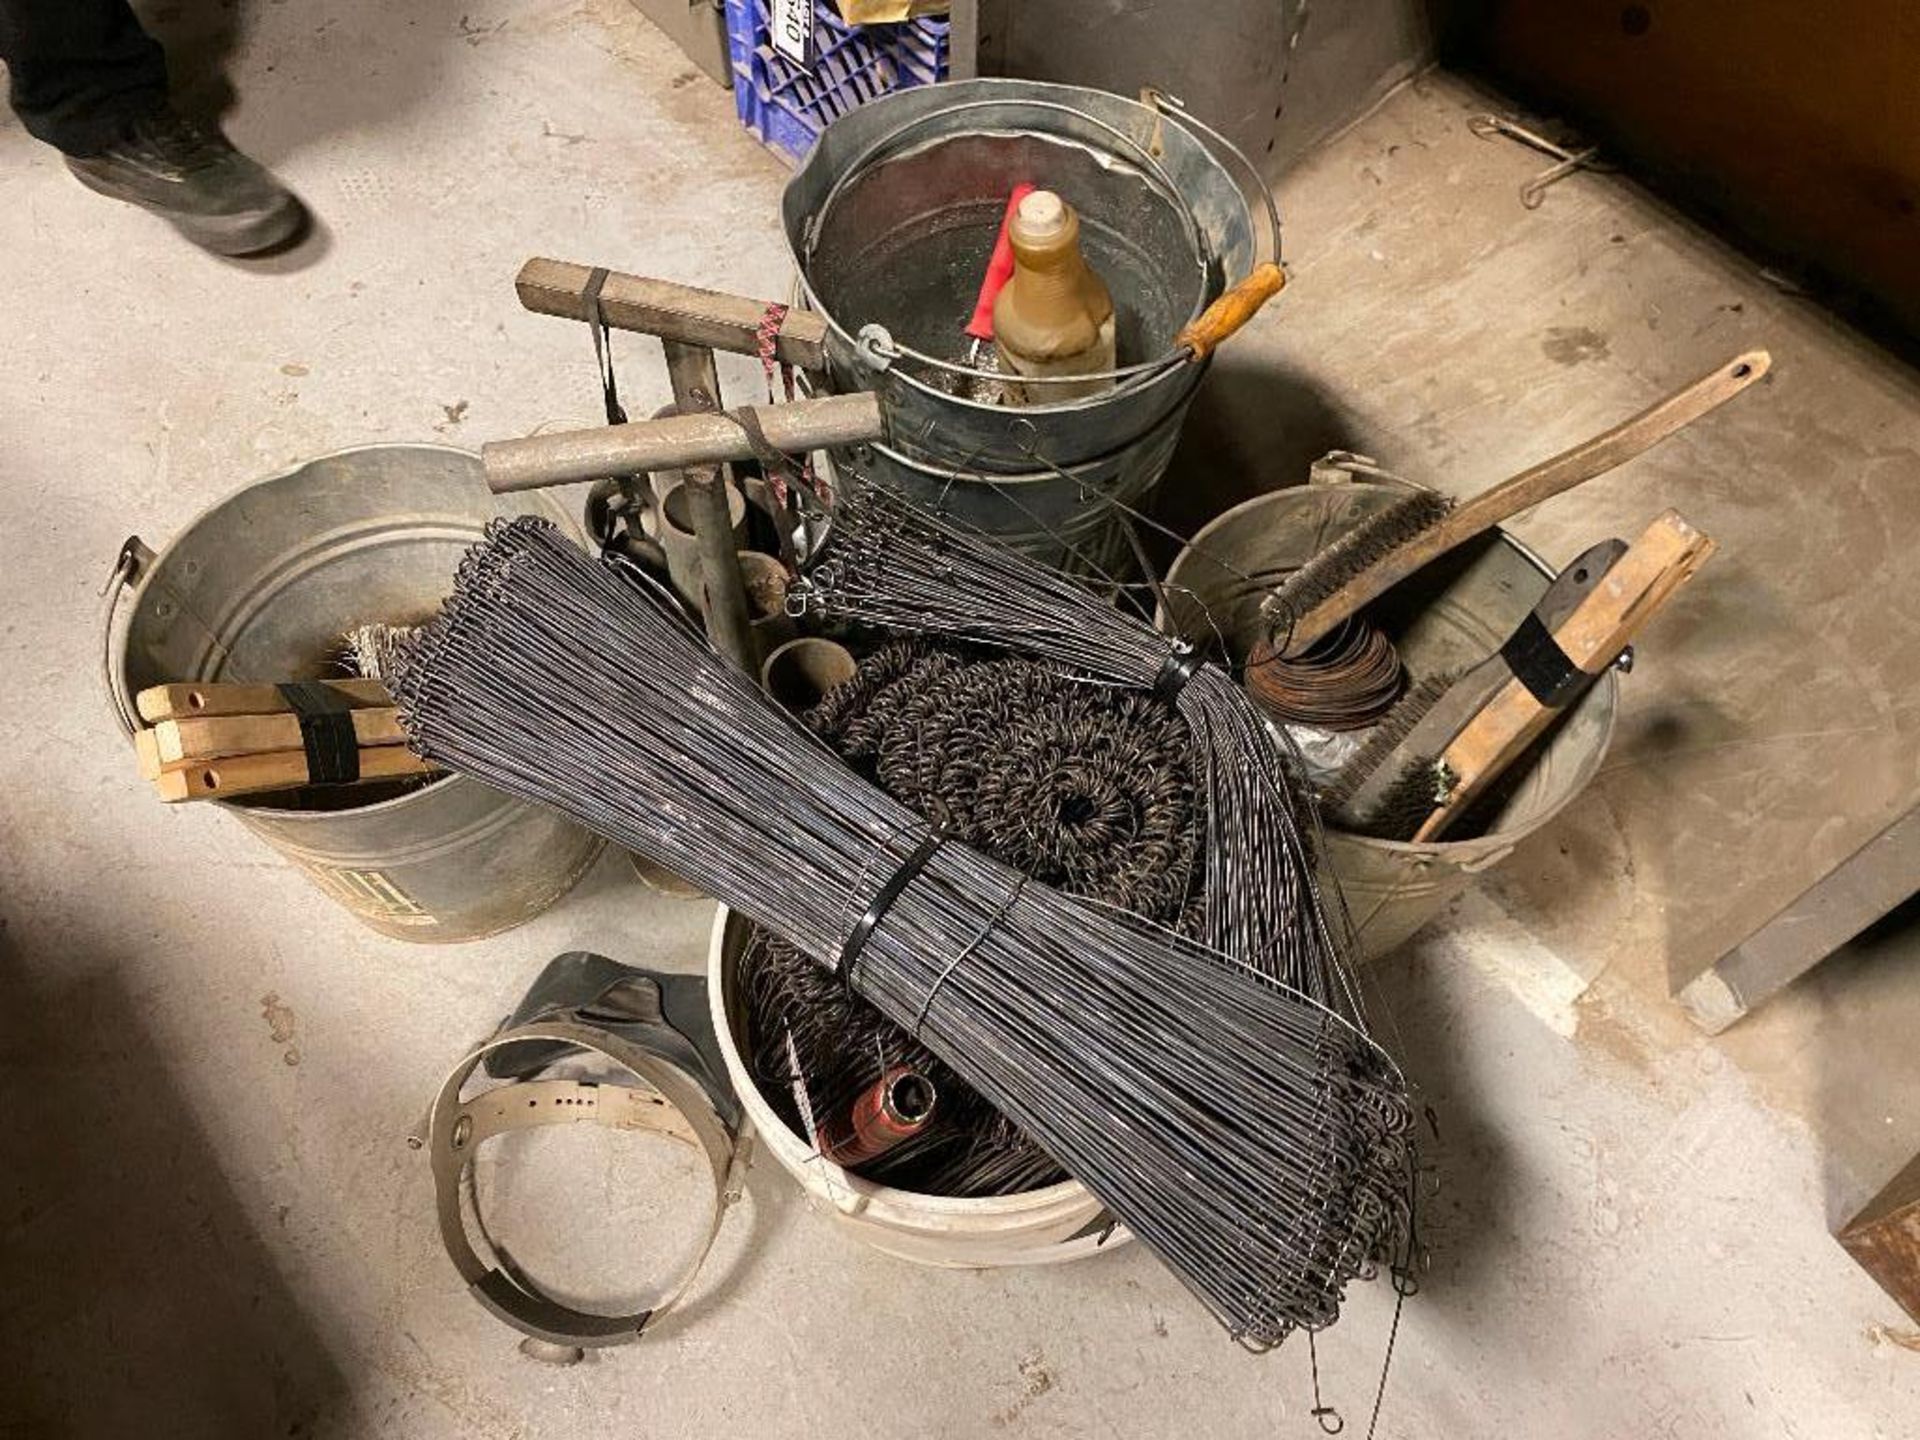 Lot of Asst. Loop Tie Wire, Wire Brushes, Haywire, Rod Holder, etc.